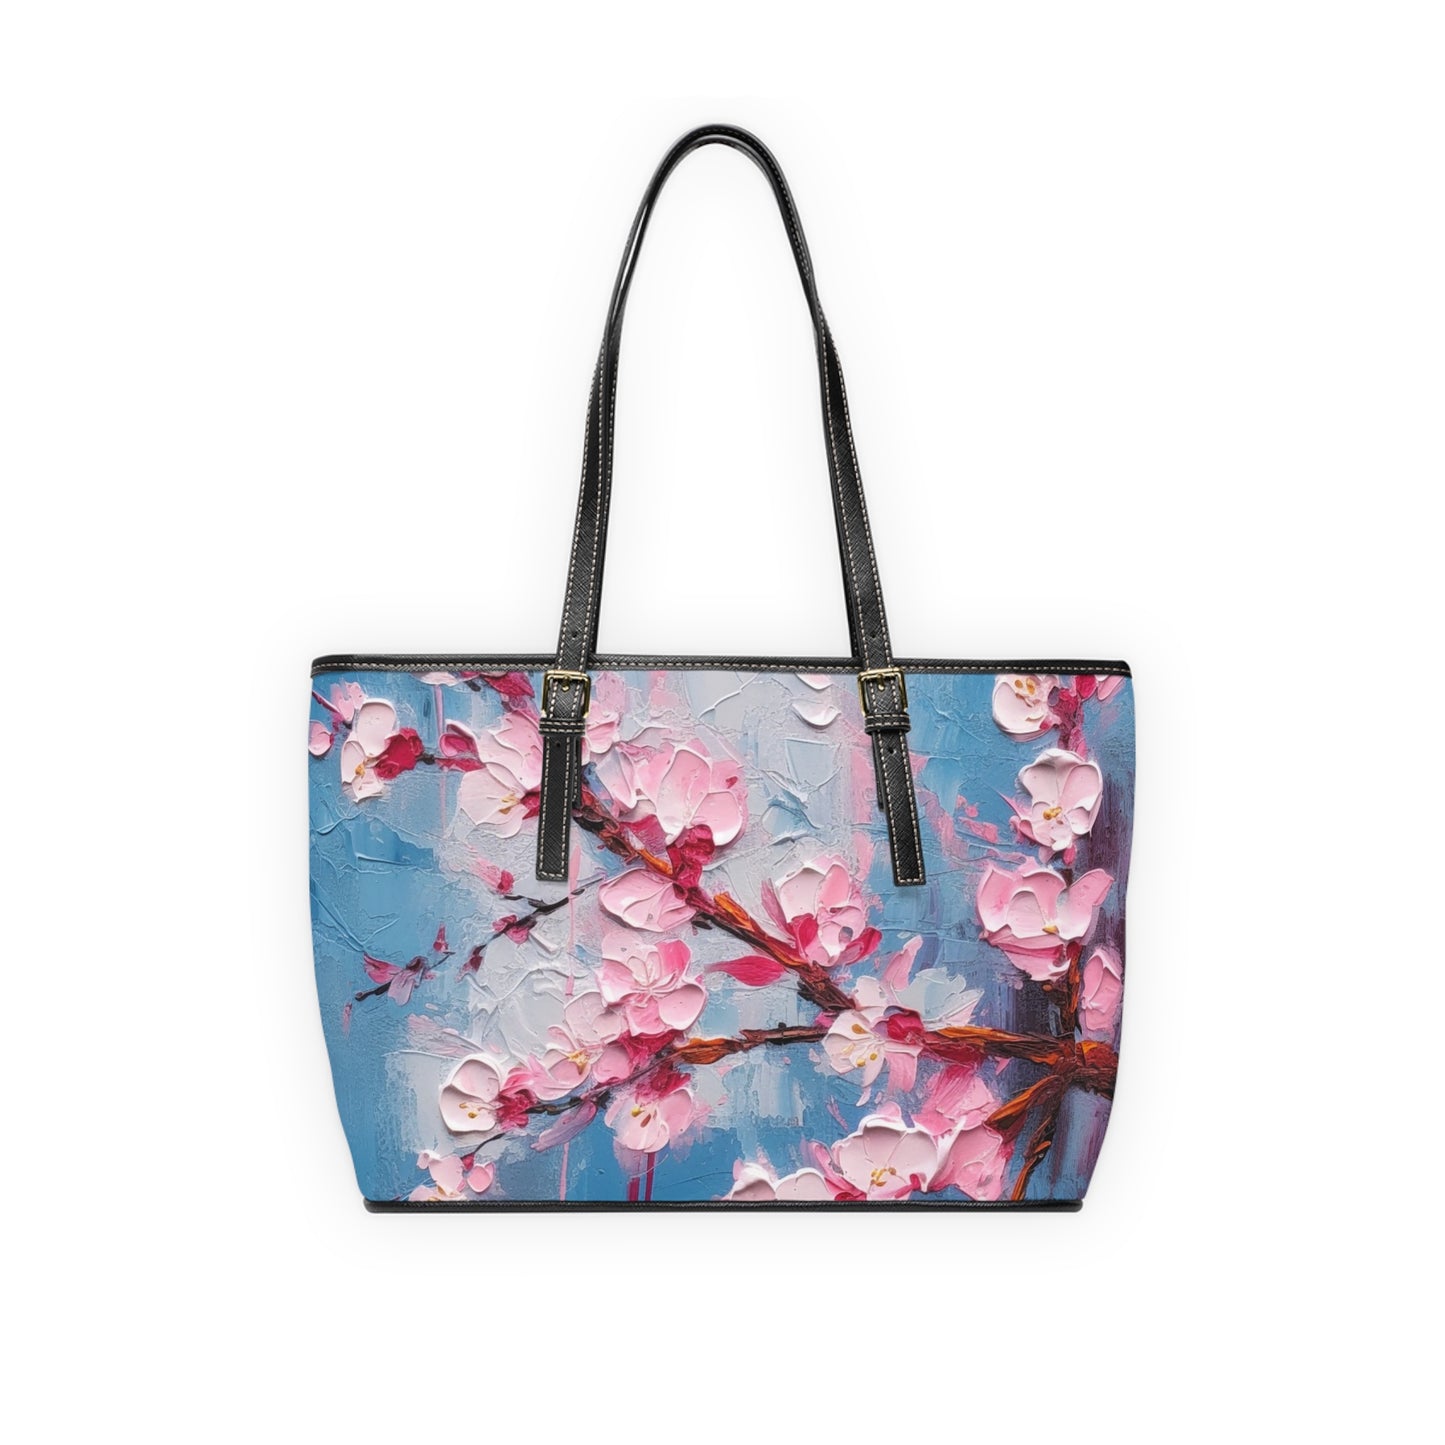 PU Leather Shoulder Bag with Abstract Cherry Blossom Drawing: Embrace the Serenity